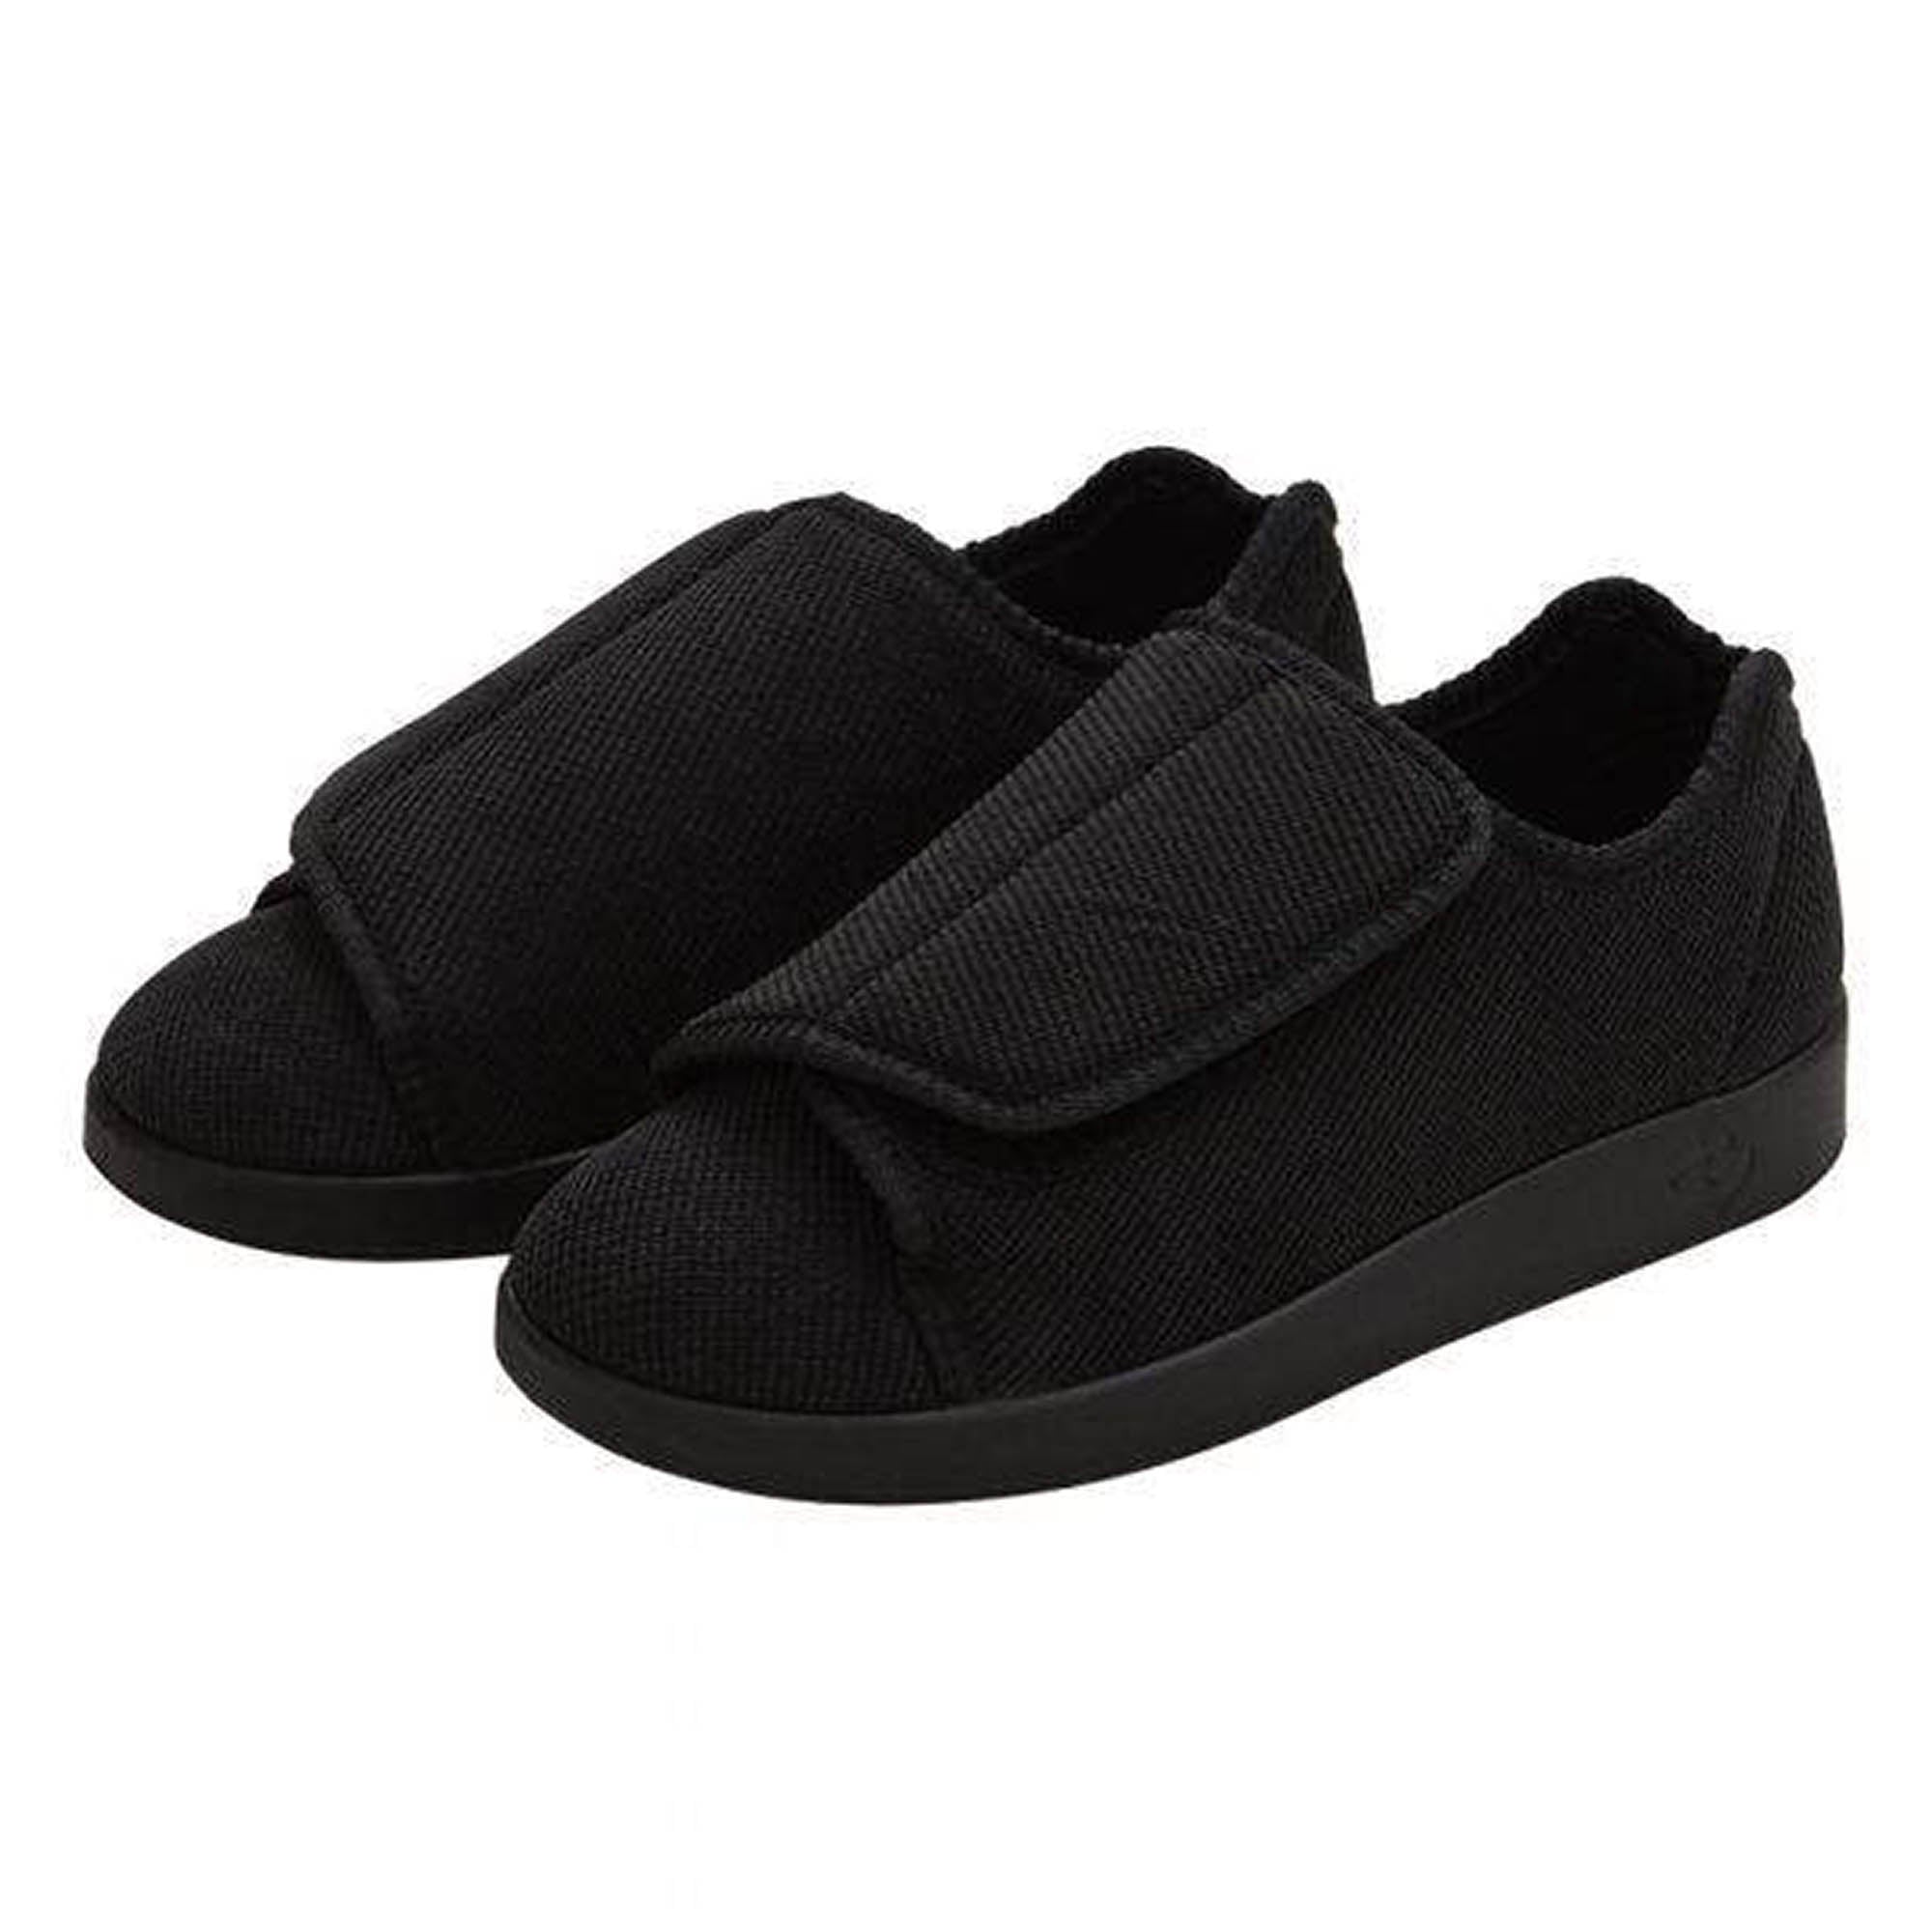 Silverts Women's Antimicrobial Extra Extra Wide Easy-Closure Slippers - Black - 6